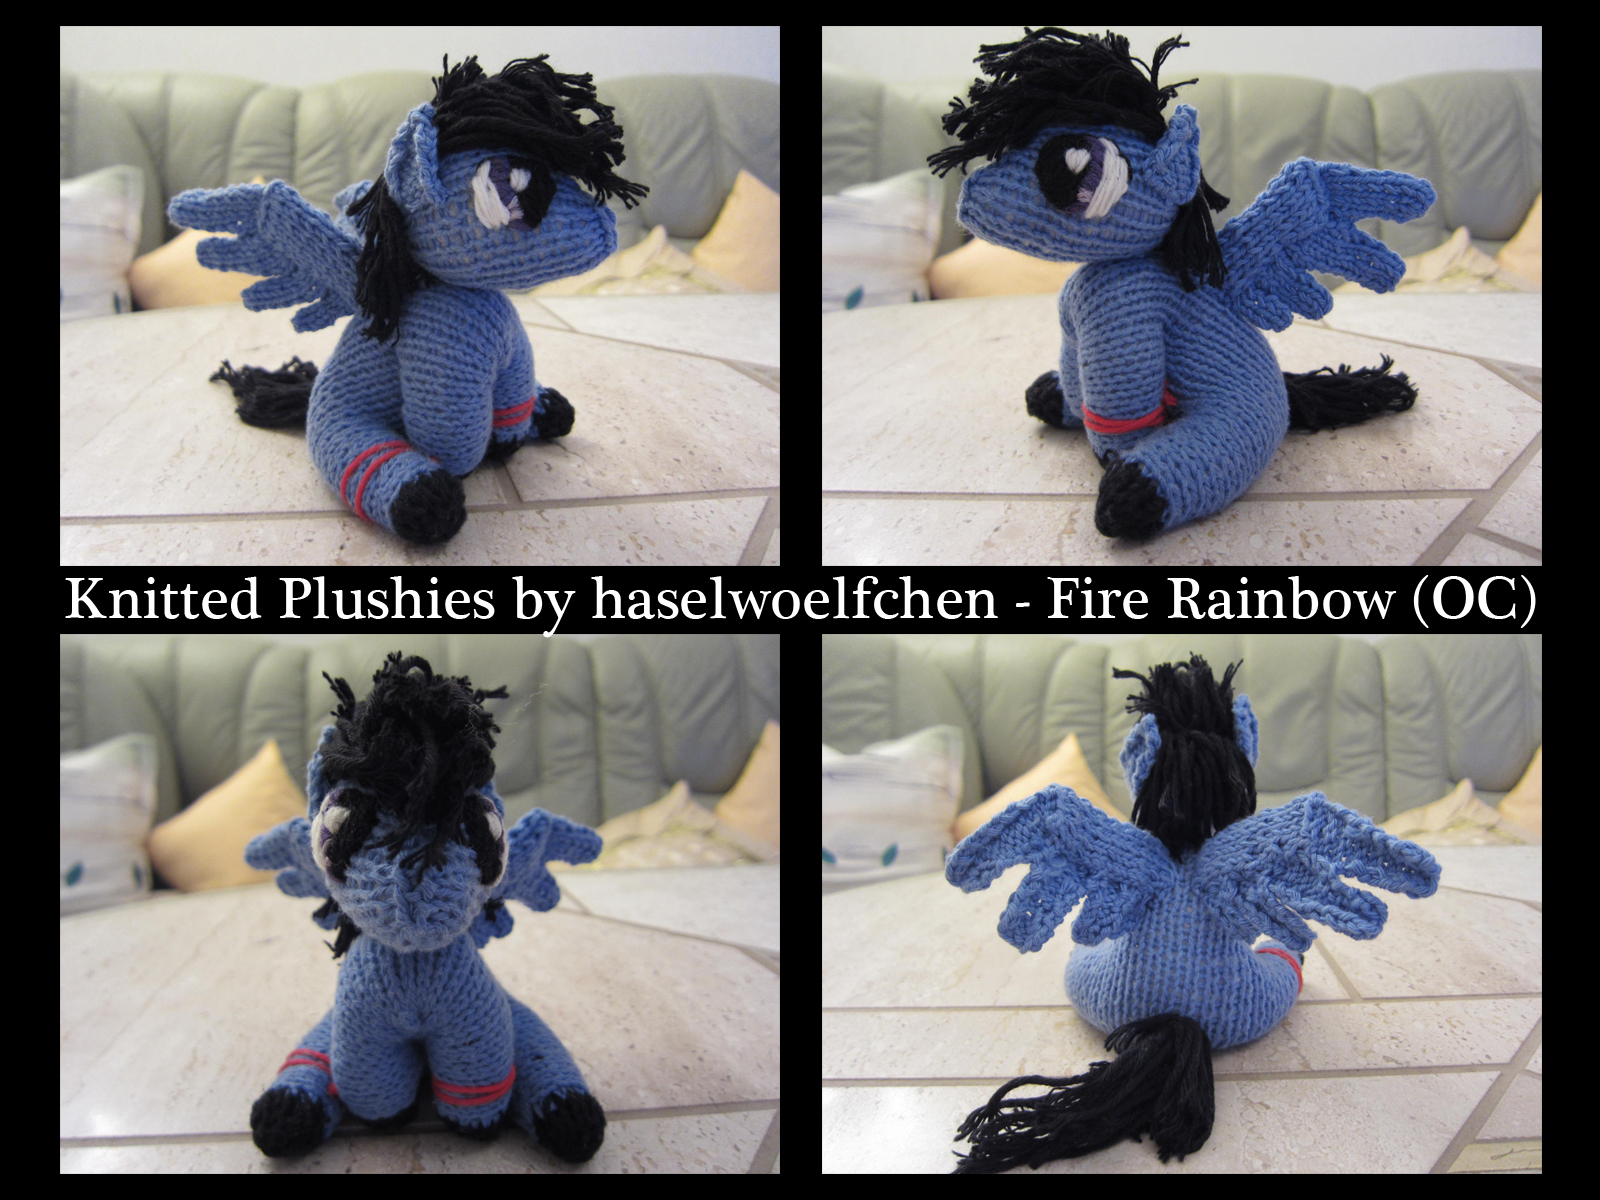 [Bild: knitted_plushies___fire_rainbow_by_hasel...60zkcy.jpg]